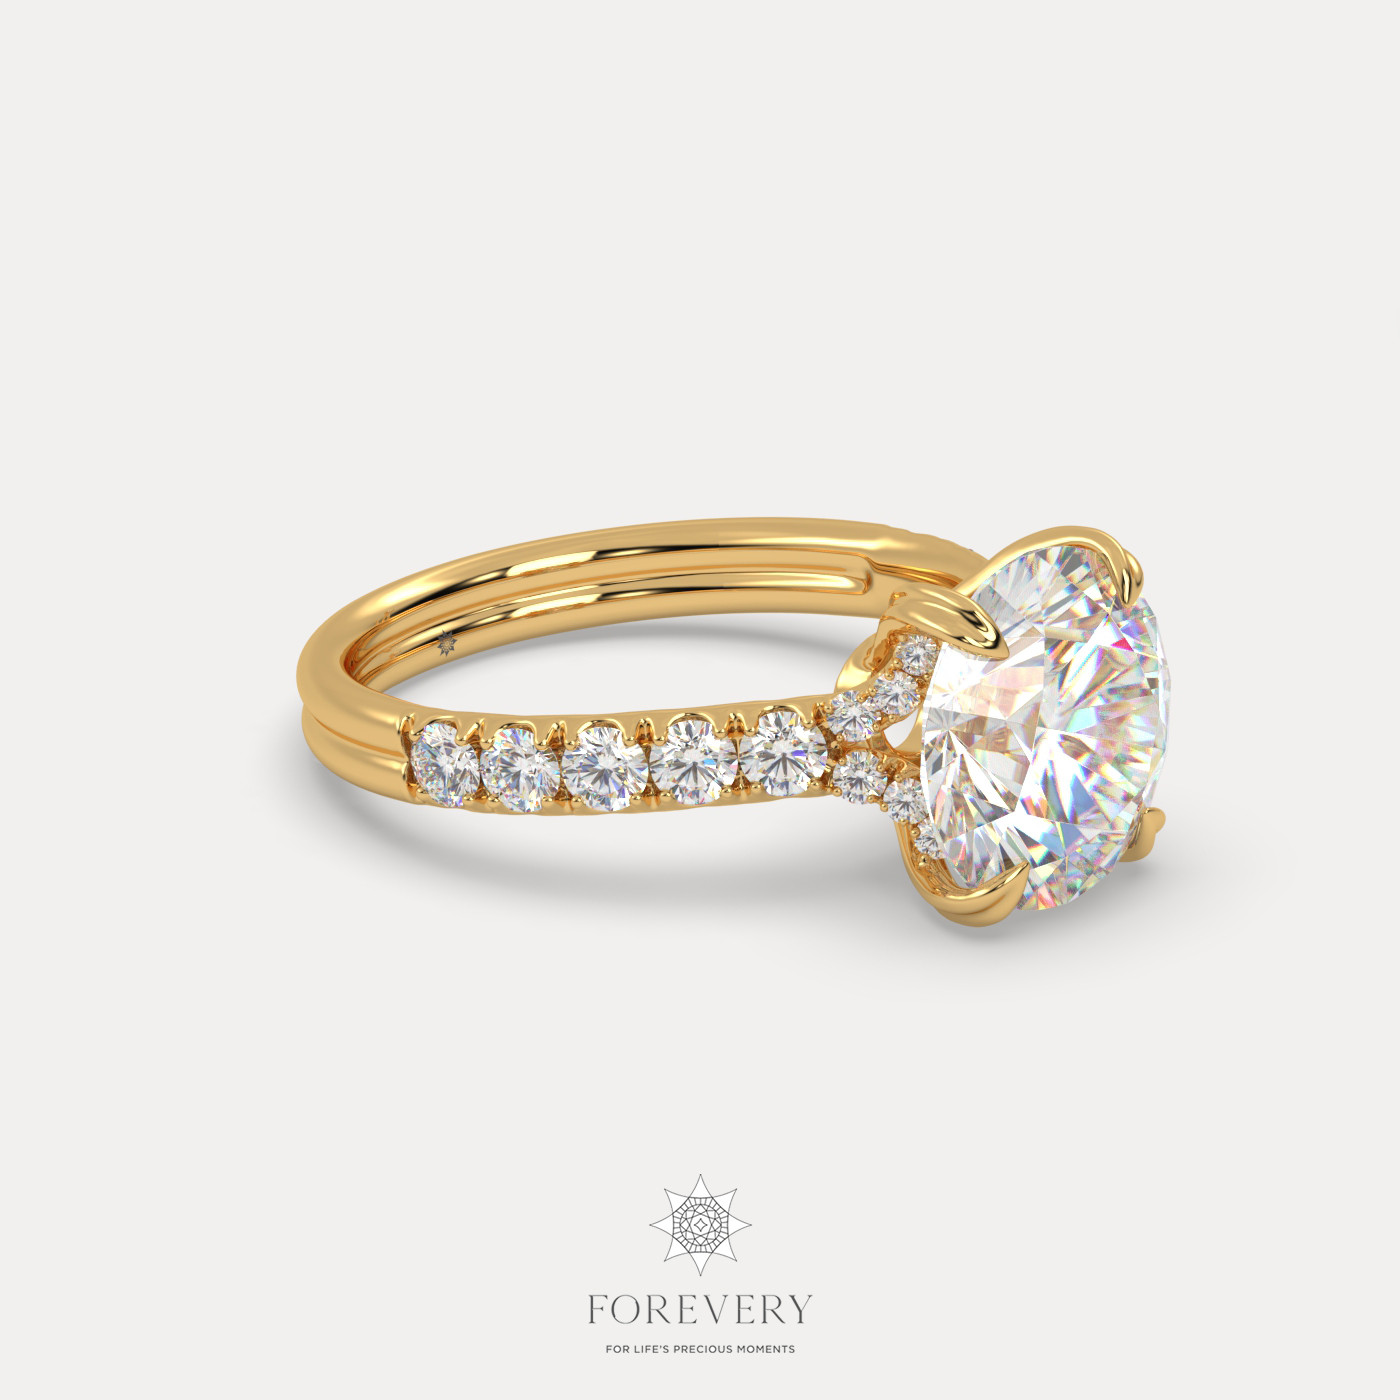 18K YELLOW GOLD Round Cut Pave-Style Diamond Engagament Ring